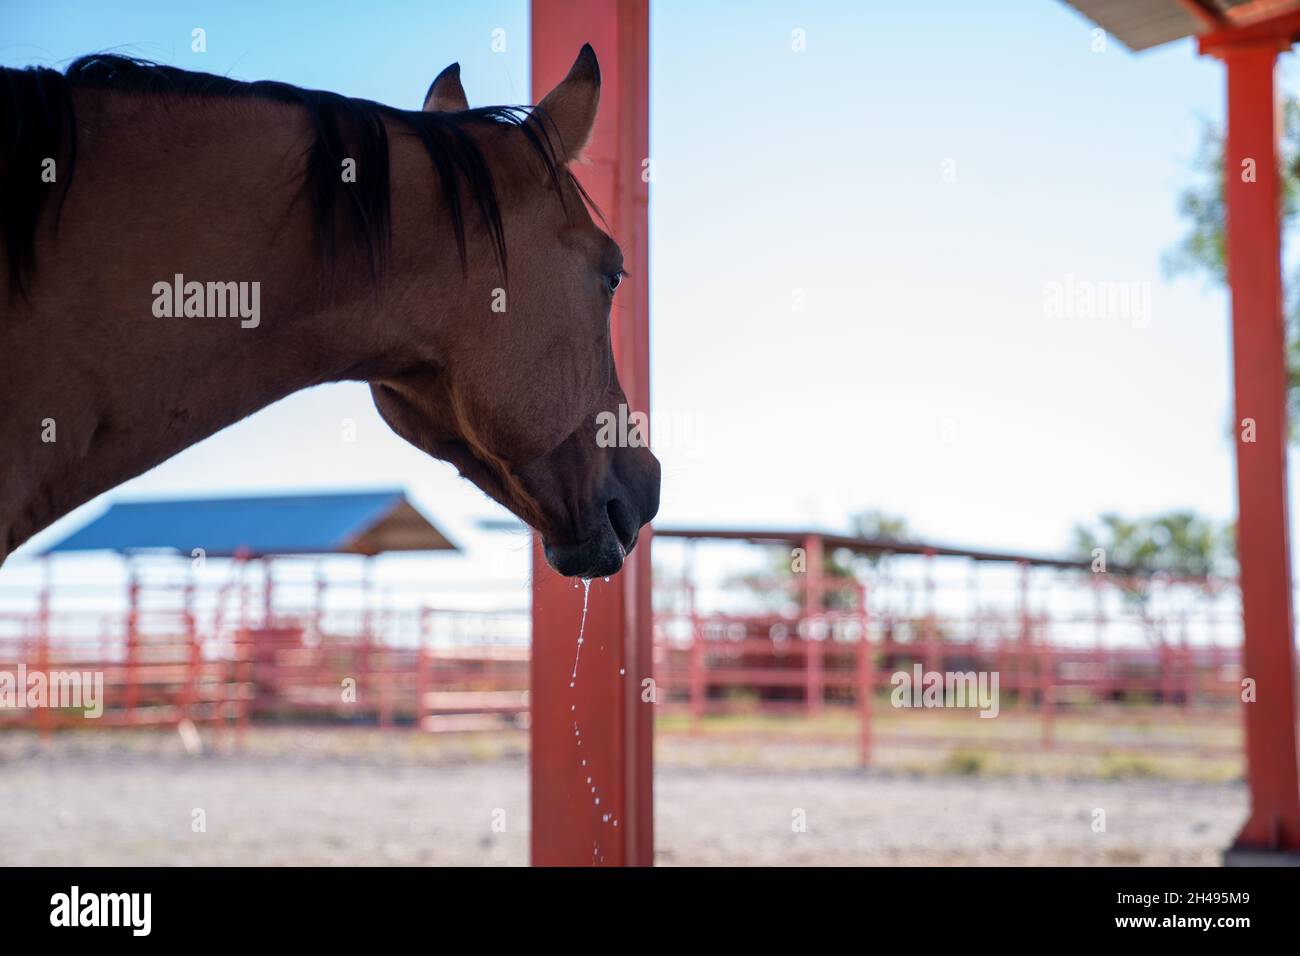 Horse drinking water and feeding Stock Photo